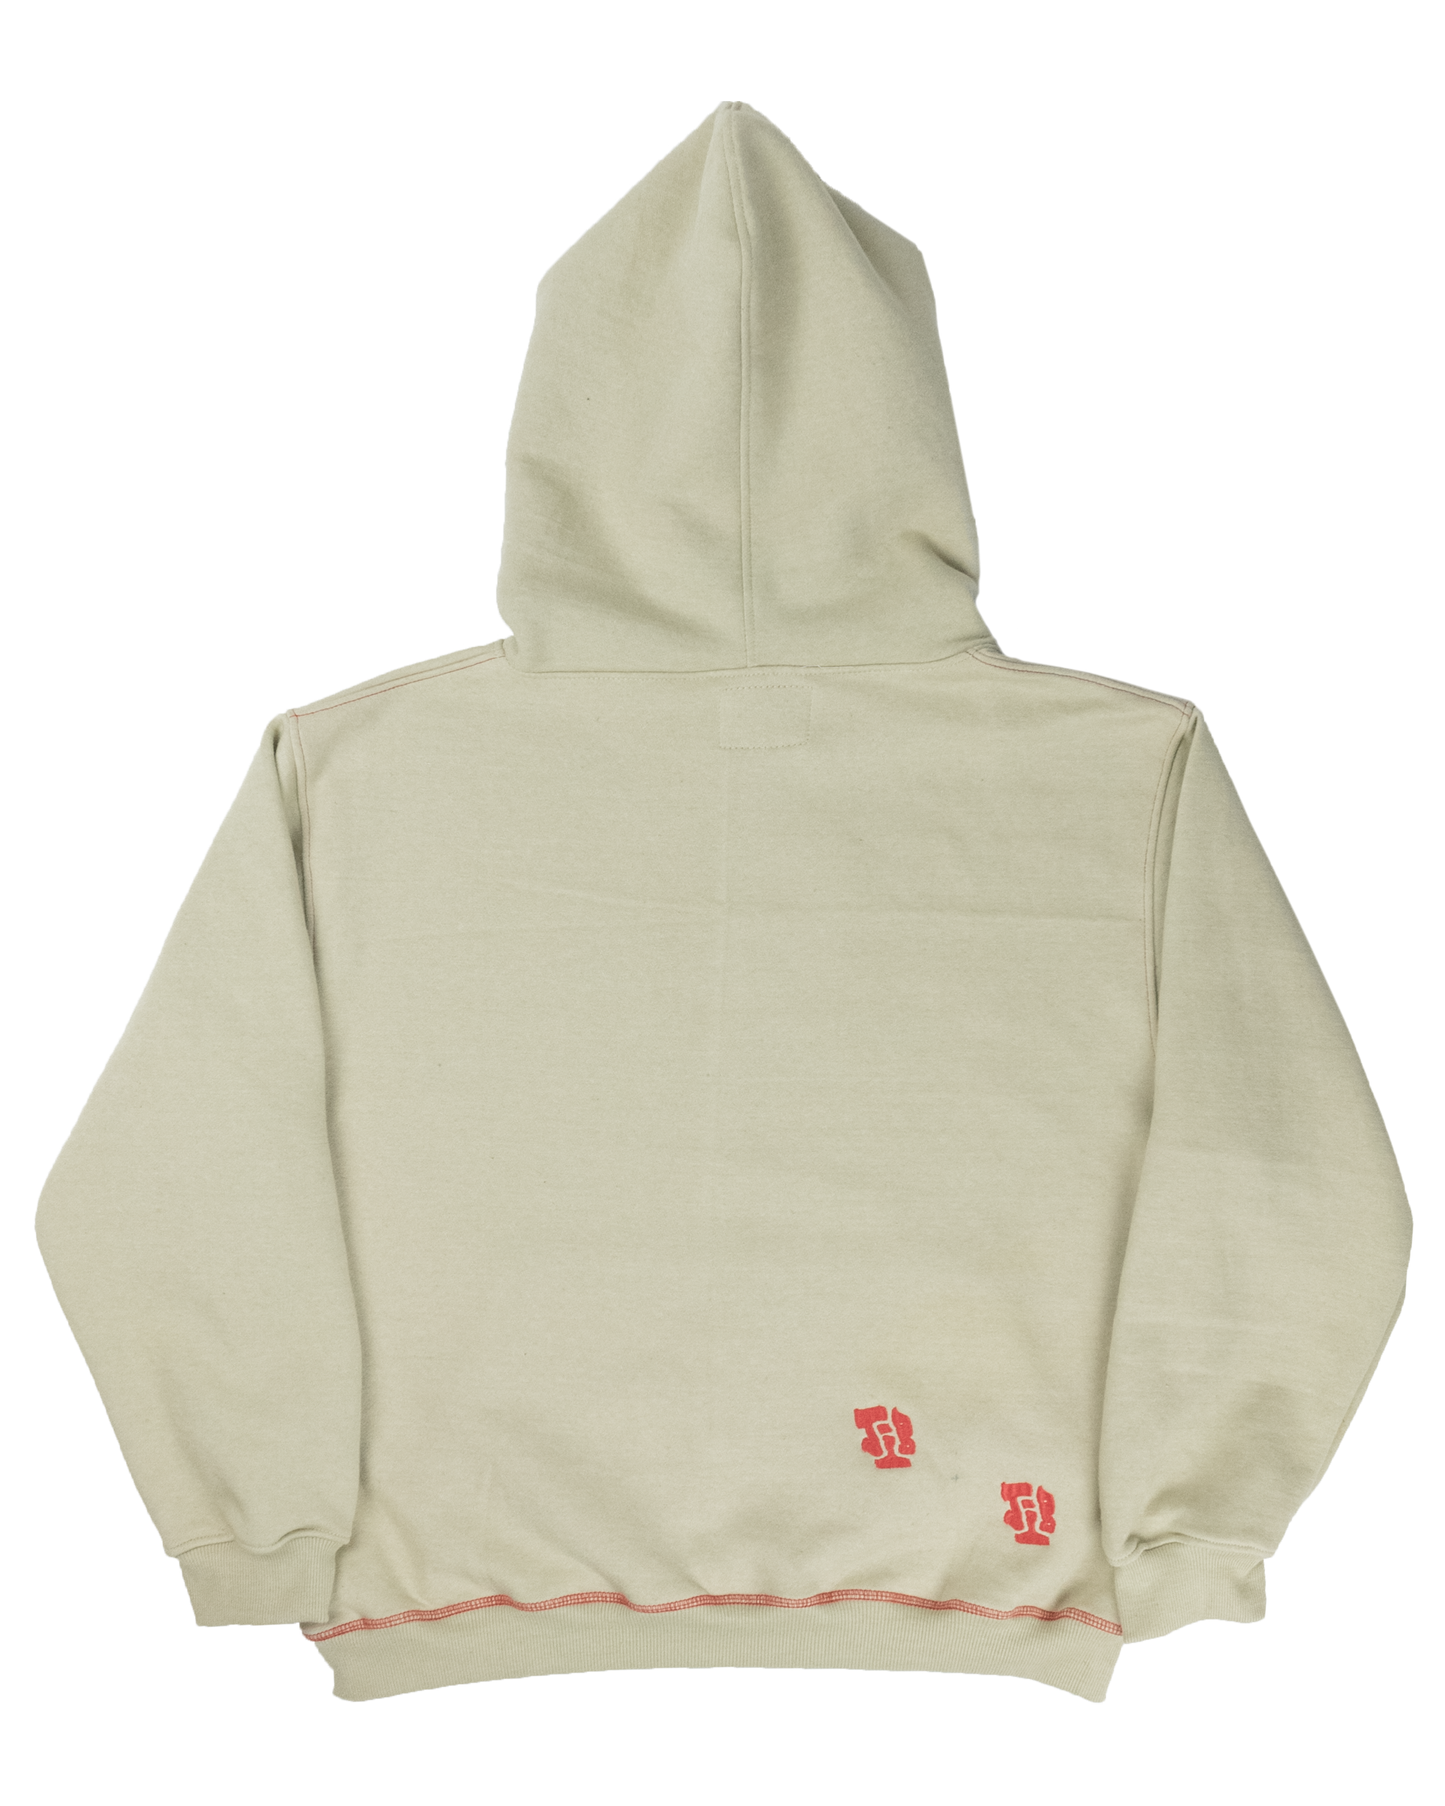 HOODIE 2 - OFF WHITE